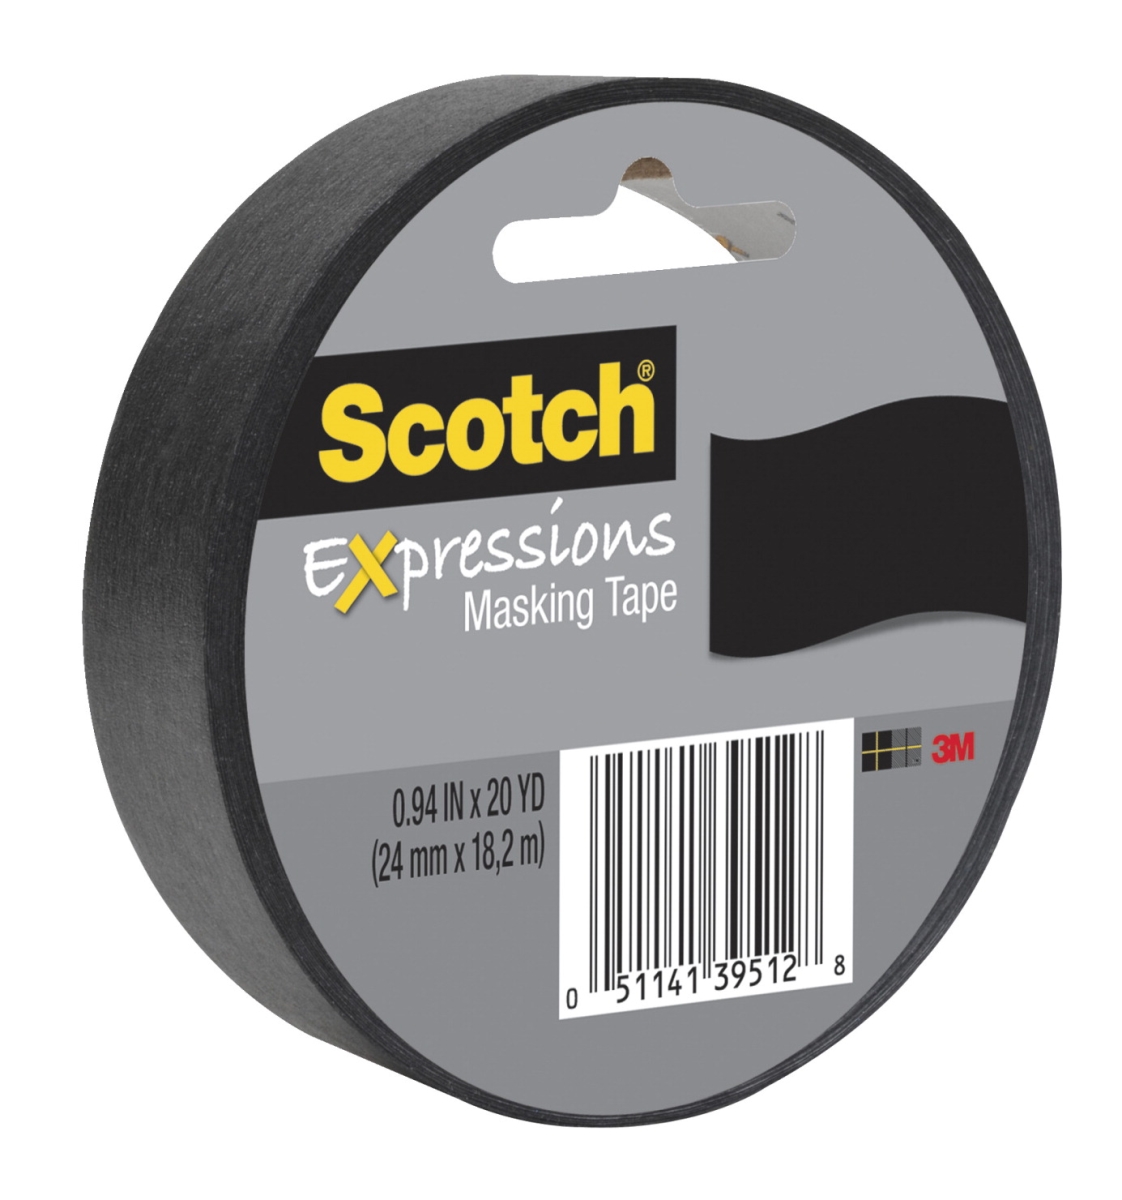 Scotch 1564377 Expressions Masking Tape, 0.94 In. X 20 Yards, Black